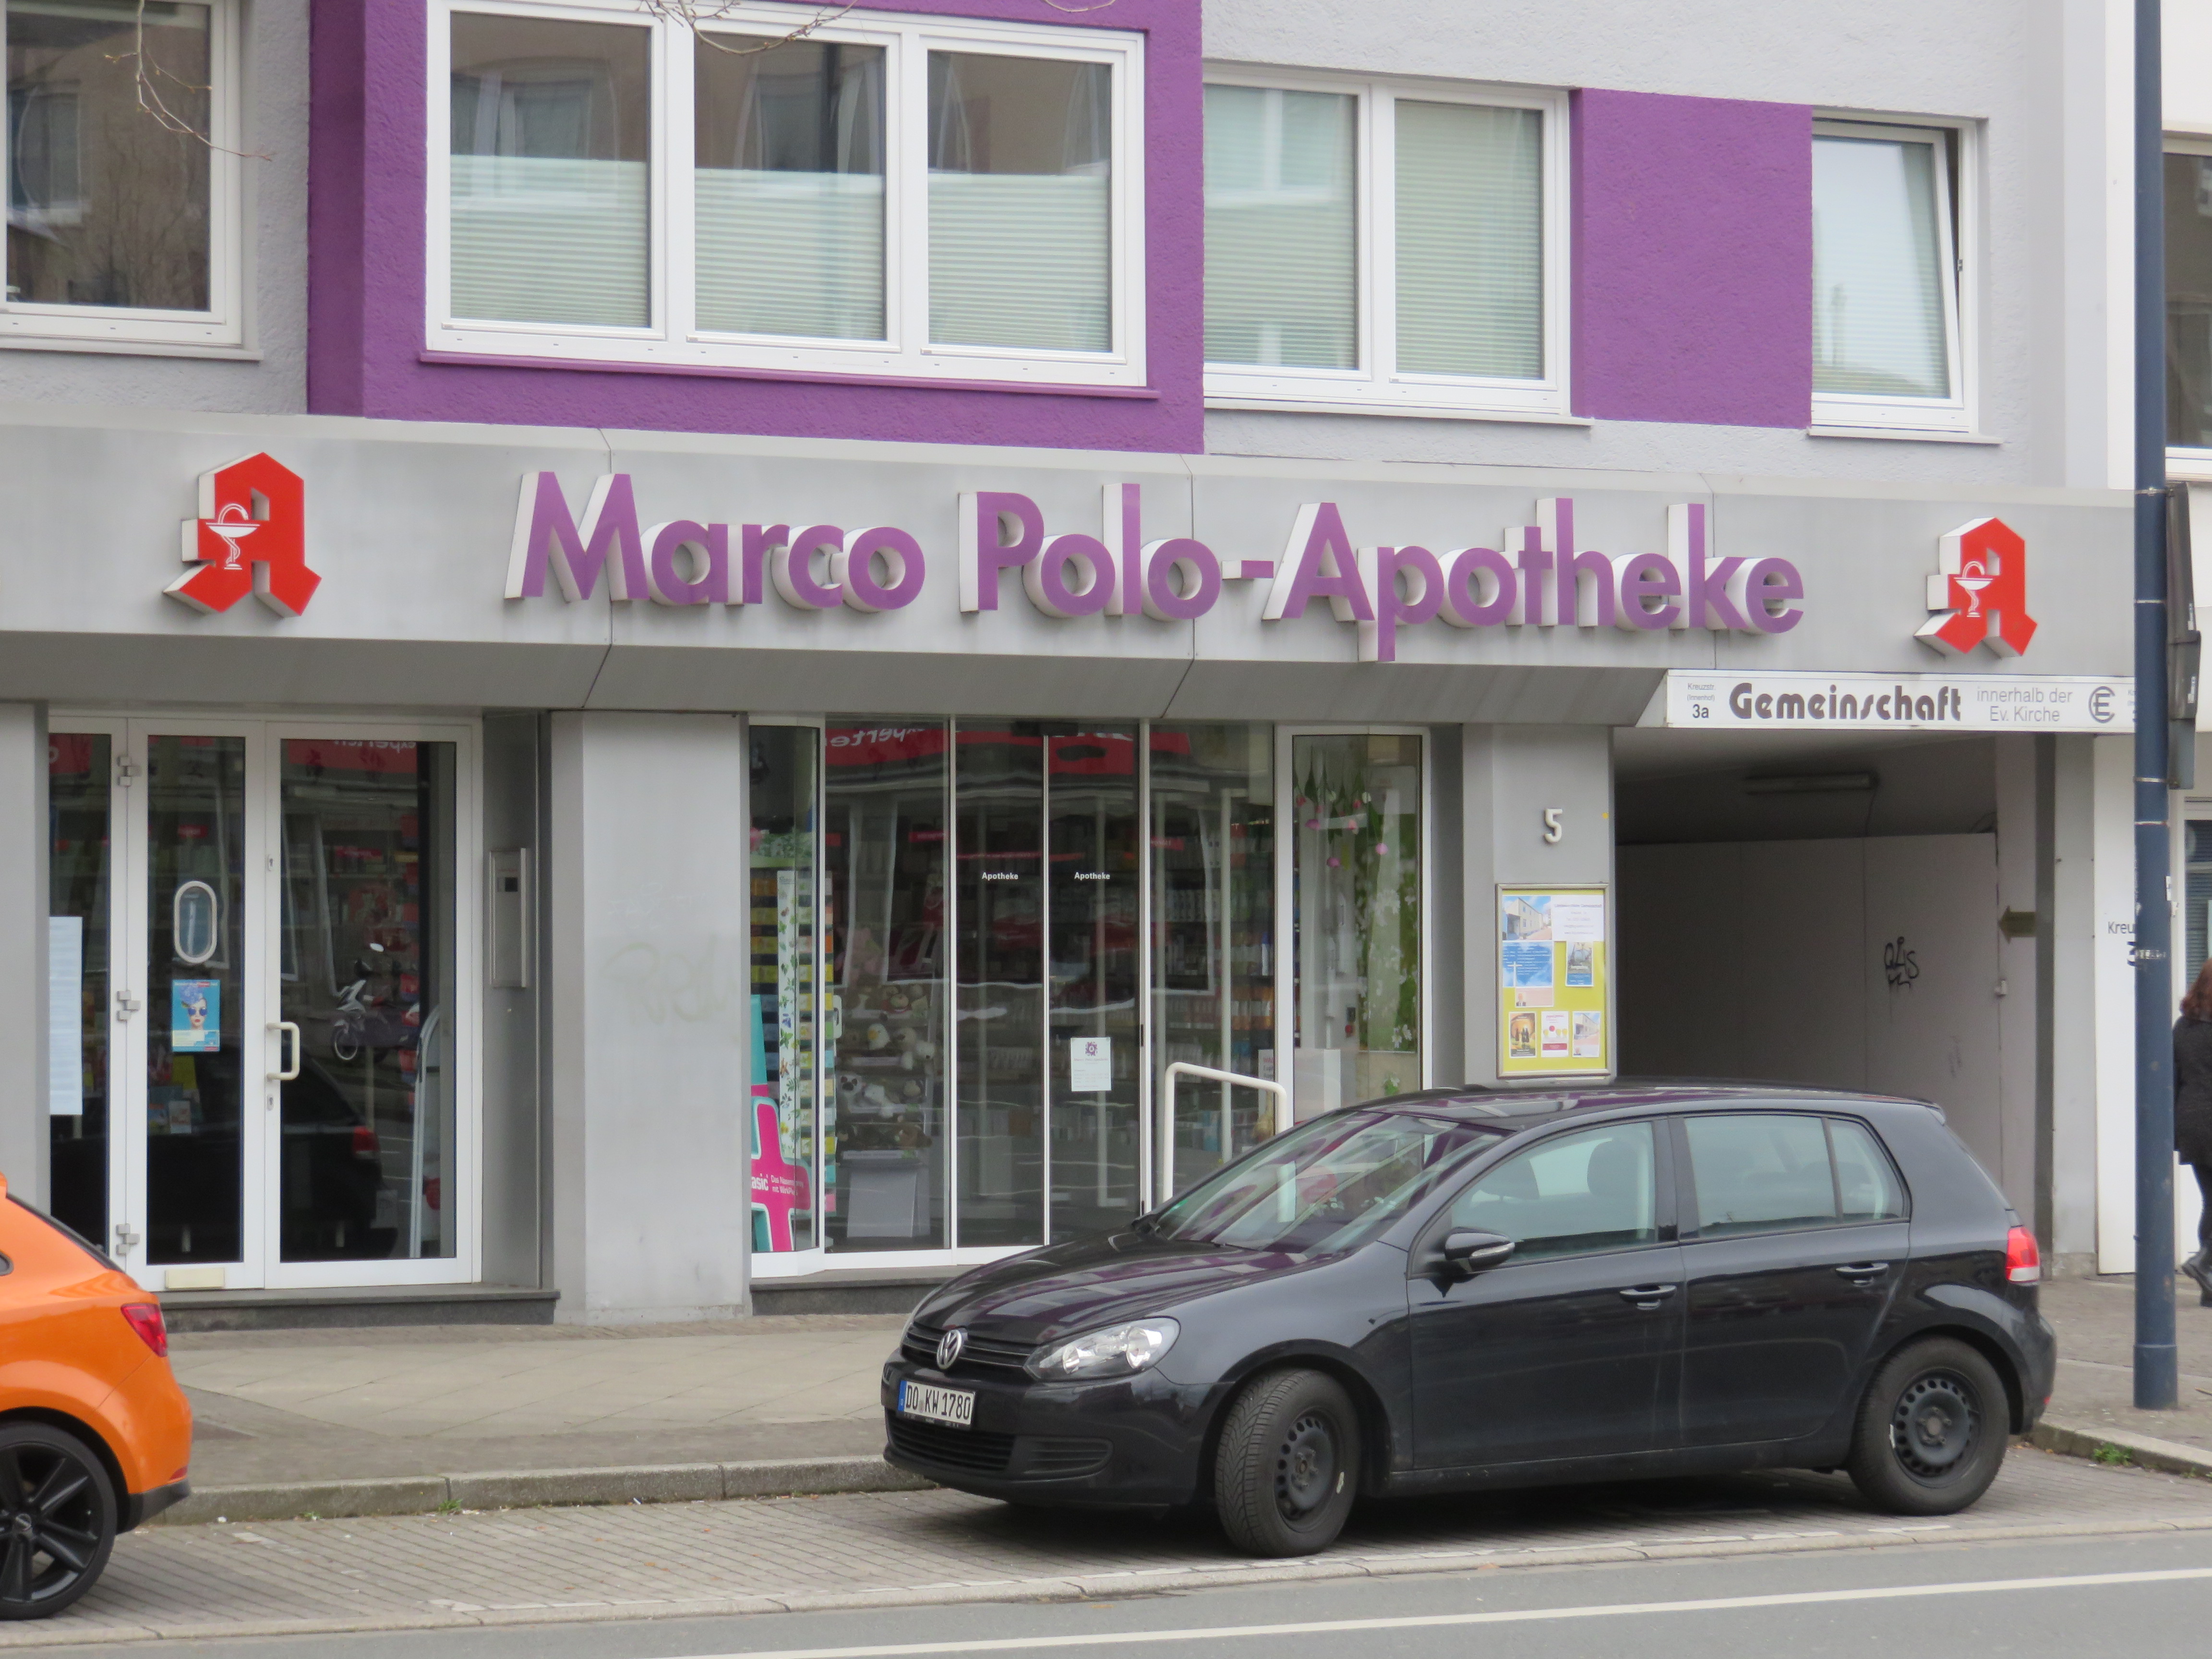 Marco Polo Apotheke Inh. H. Reckels in 44139 Dortmund-Mitte